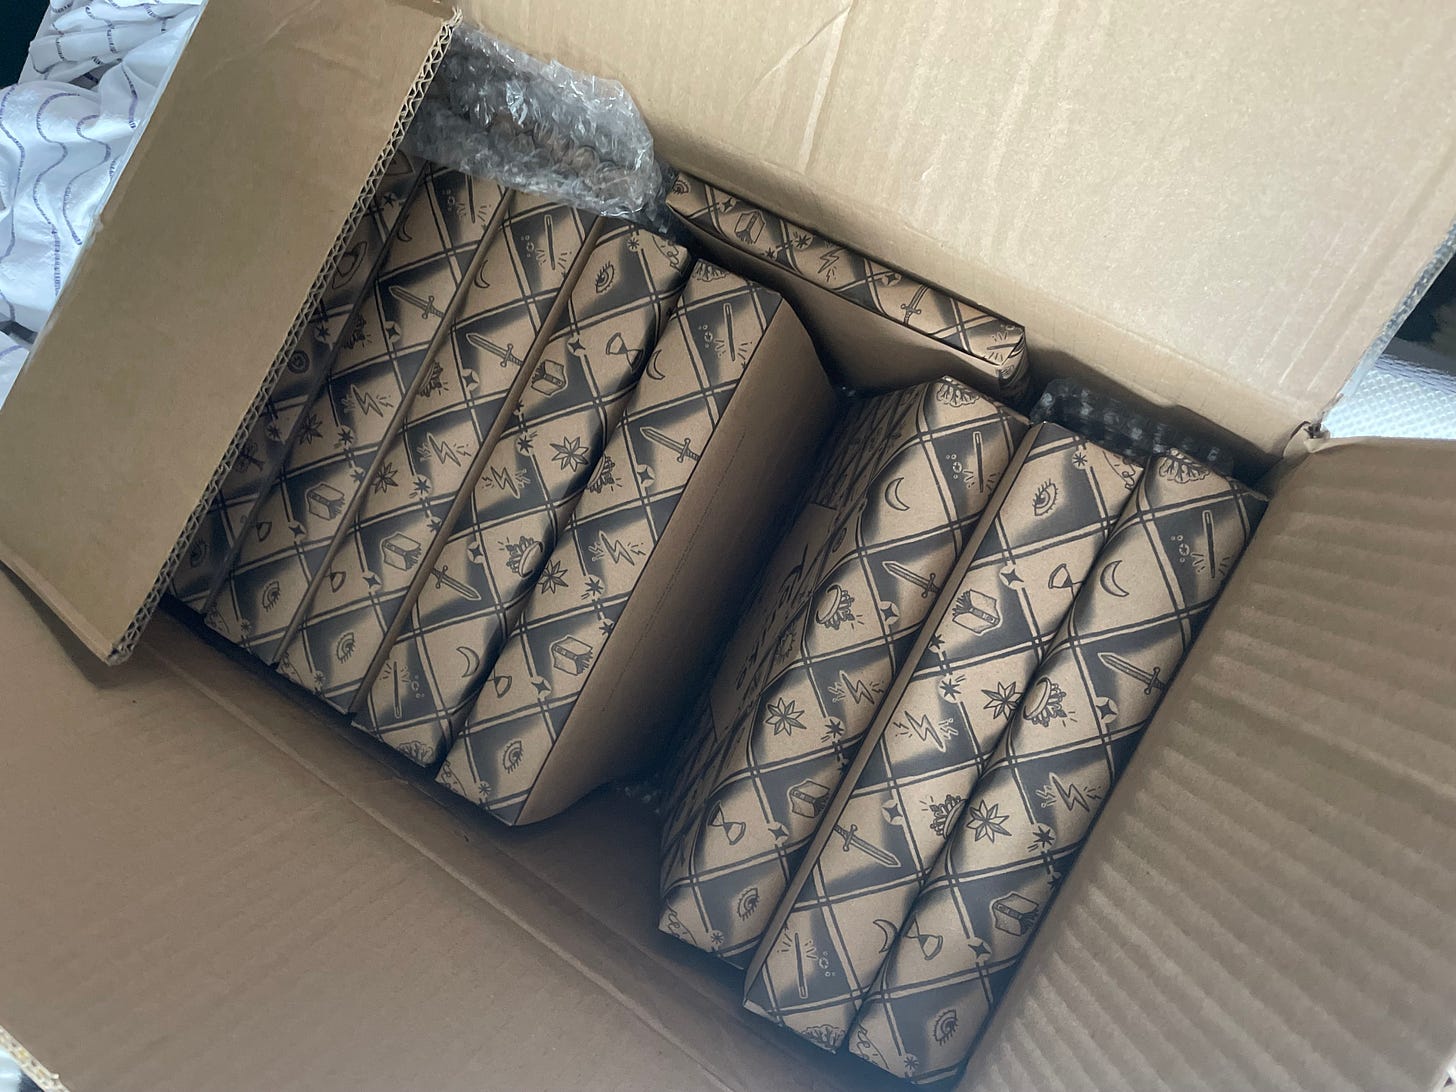 A cardboard box full of paper-wrapped copies of Koriko.